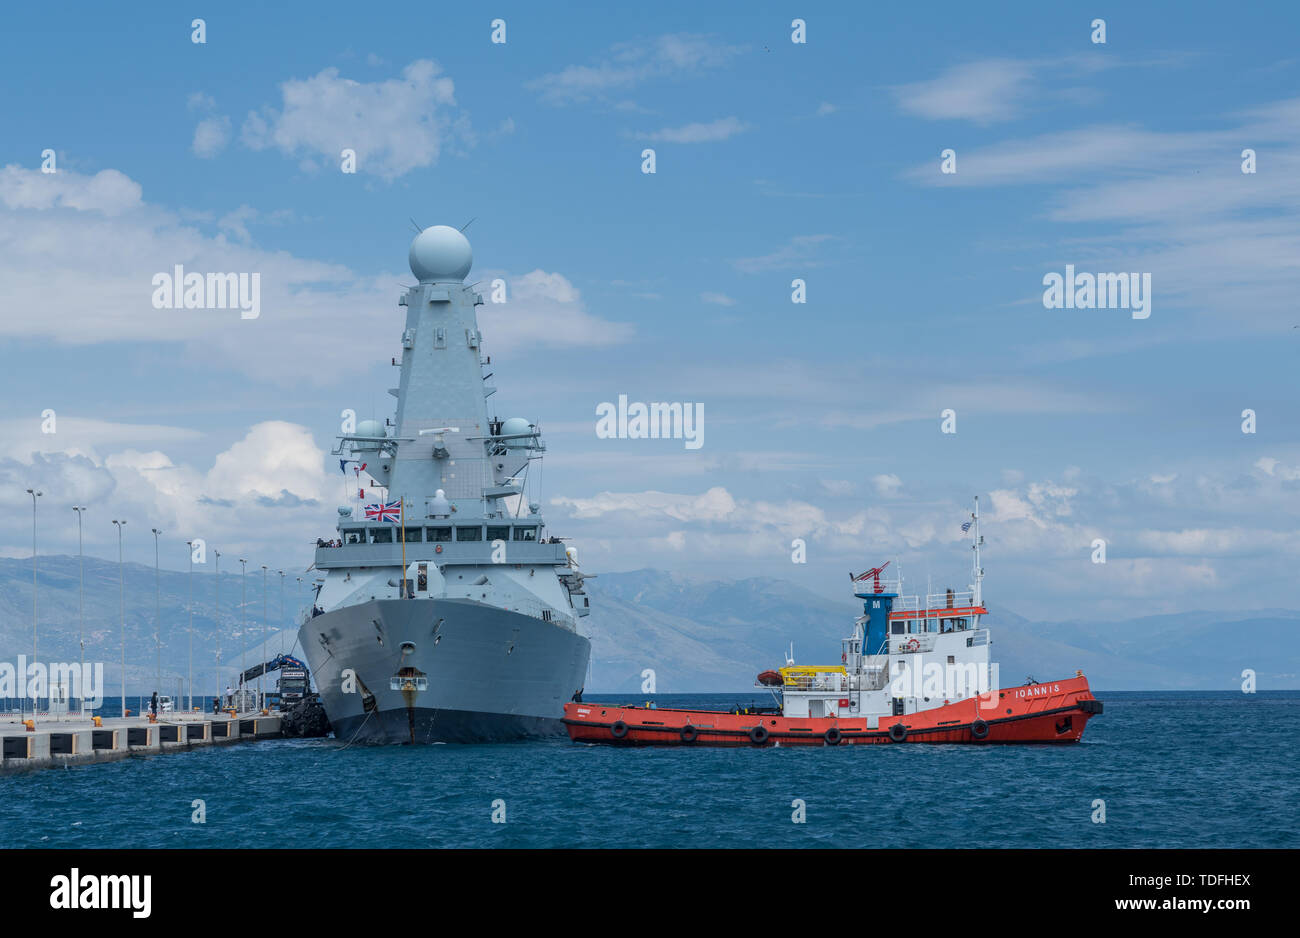 Royal Navy Destroyer HMS Duncan berthed in Corfu Stock Photo